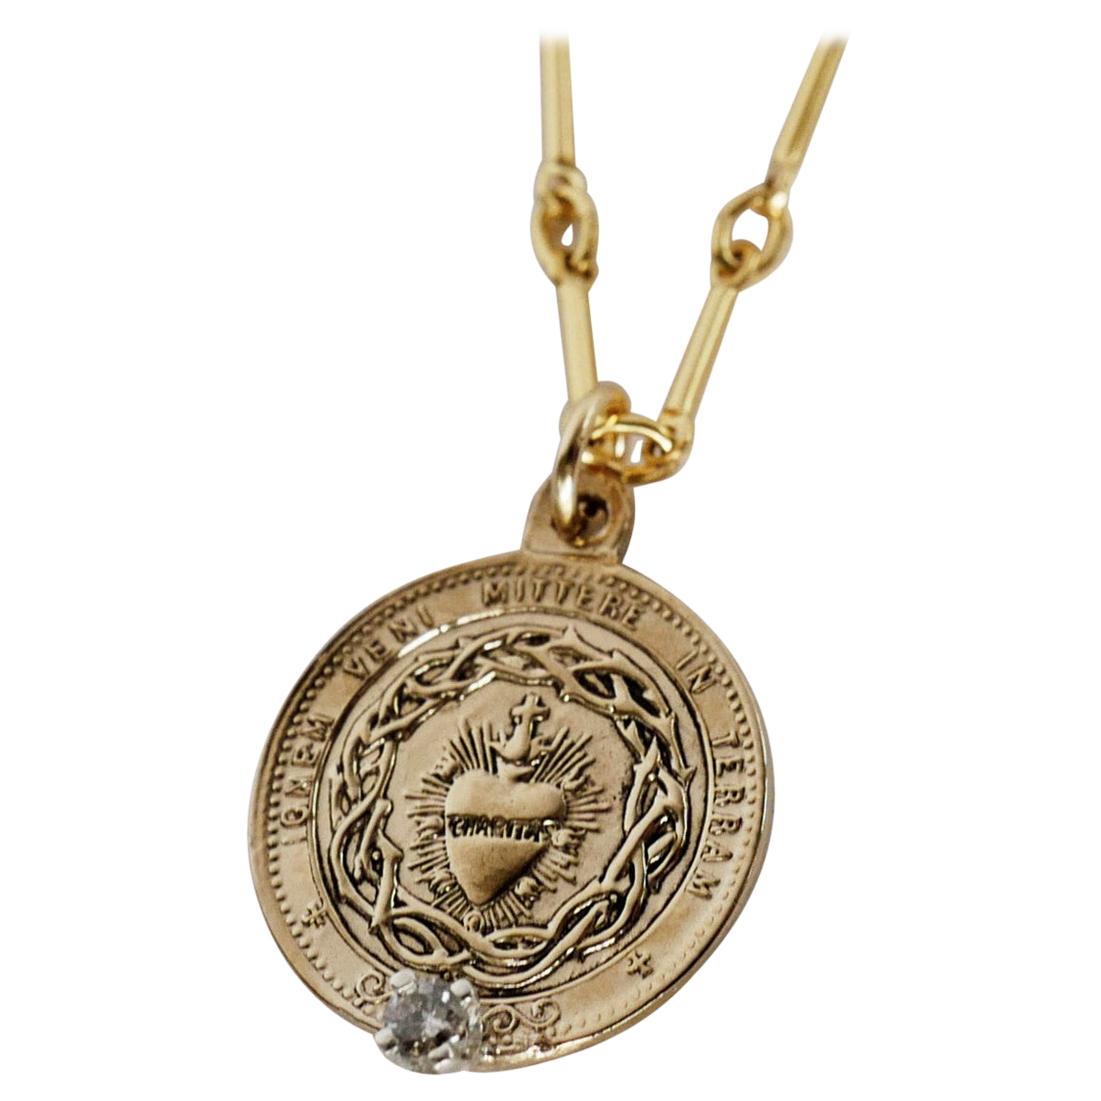 White Diamond Sacred Heart Coin Medal Pendant Chain Necklace
Gold Vermeil Pendant and Gold Filled Chain
22